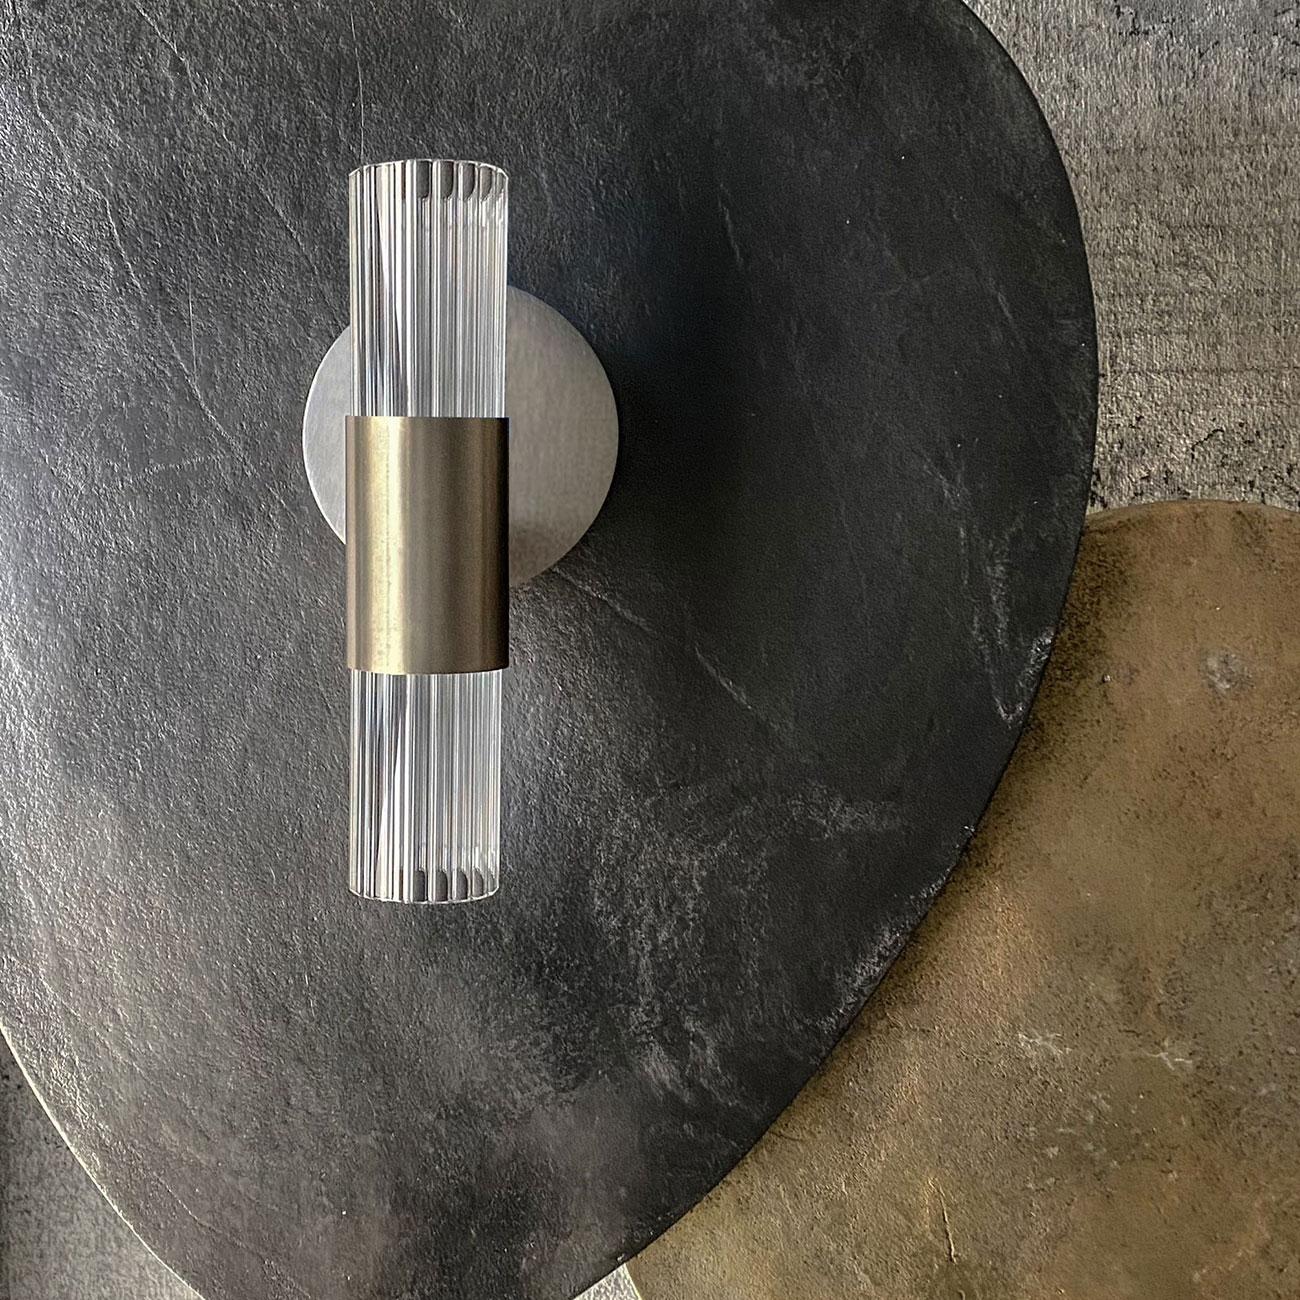 Sbarlusc wall lamp by Luce Tu
Dimensions: 13 x H 27.5 cm
Materials: Brass and glass

Cutting-edge technology and craftsmanship come together in this applique with an almost timeless charm. Like a precious jewel, the wall lamp from the Sbarlusc